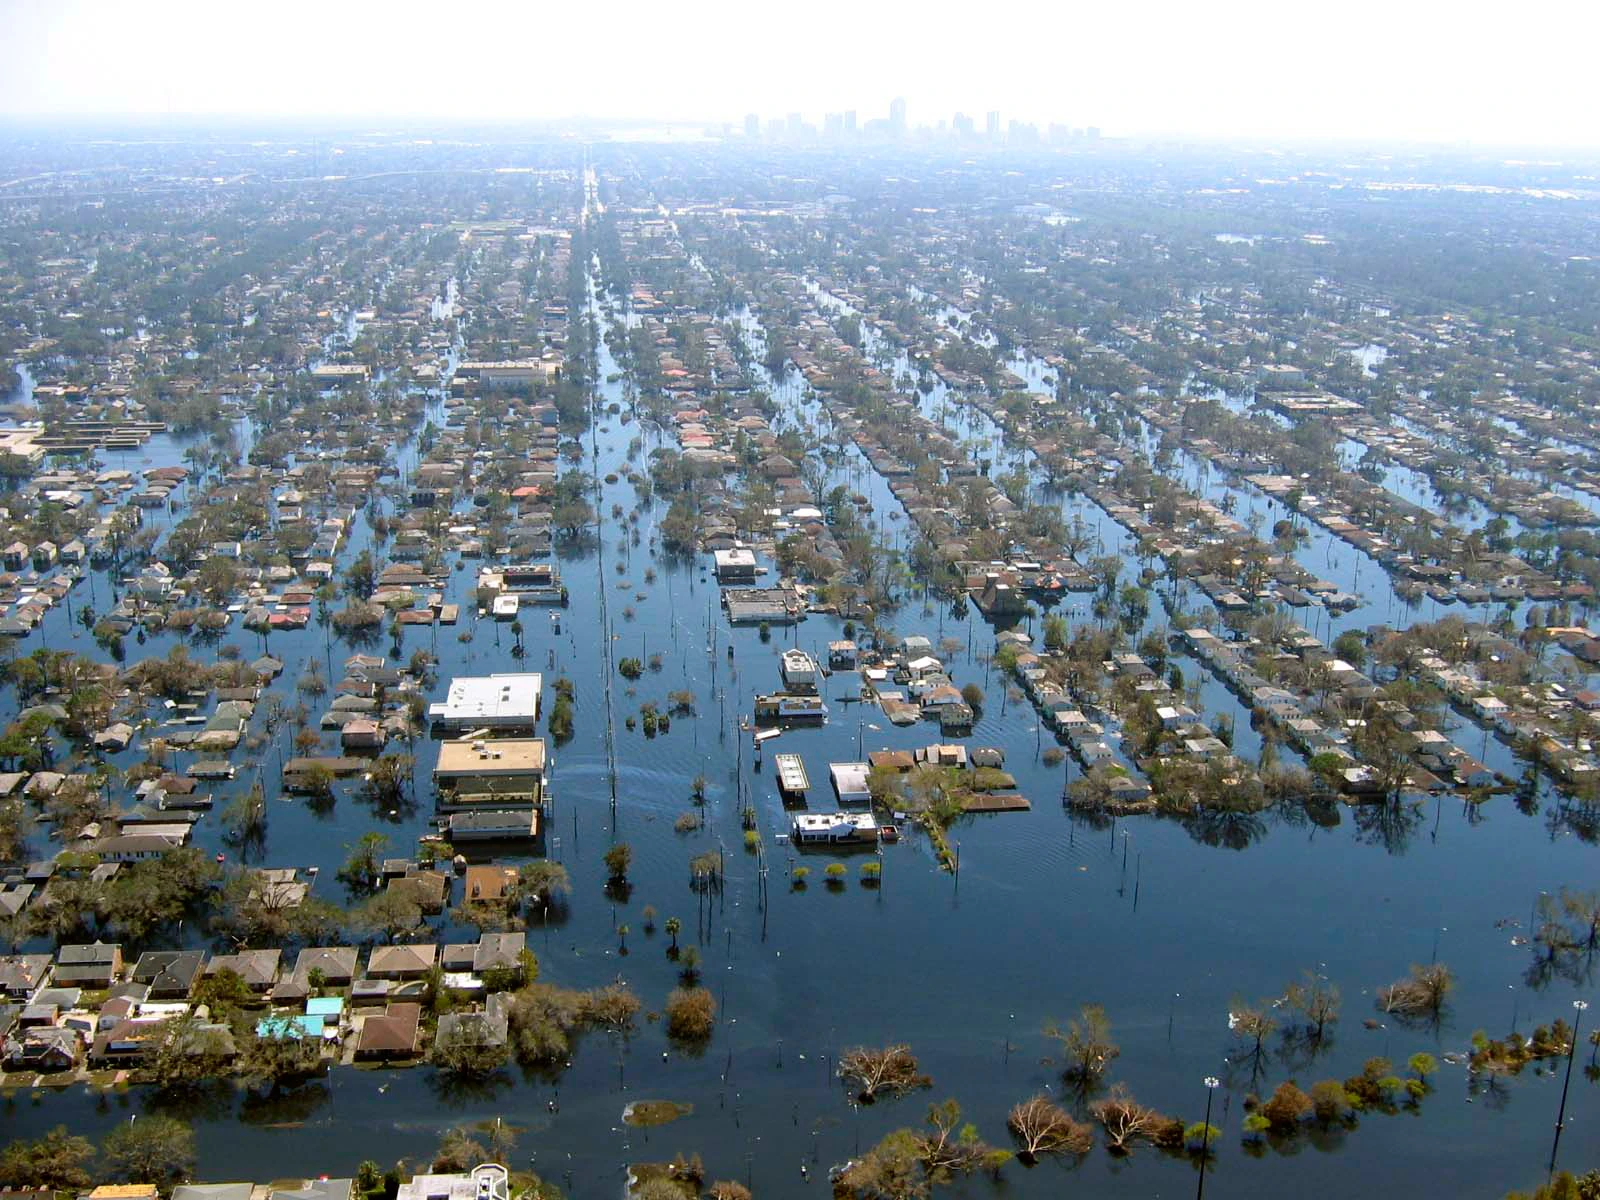 Aerial views of damage caused from Hurricane Katrina the day after the hurricane hit August 30, 2005.